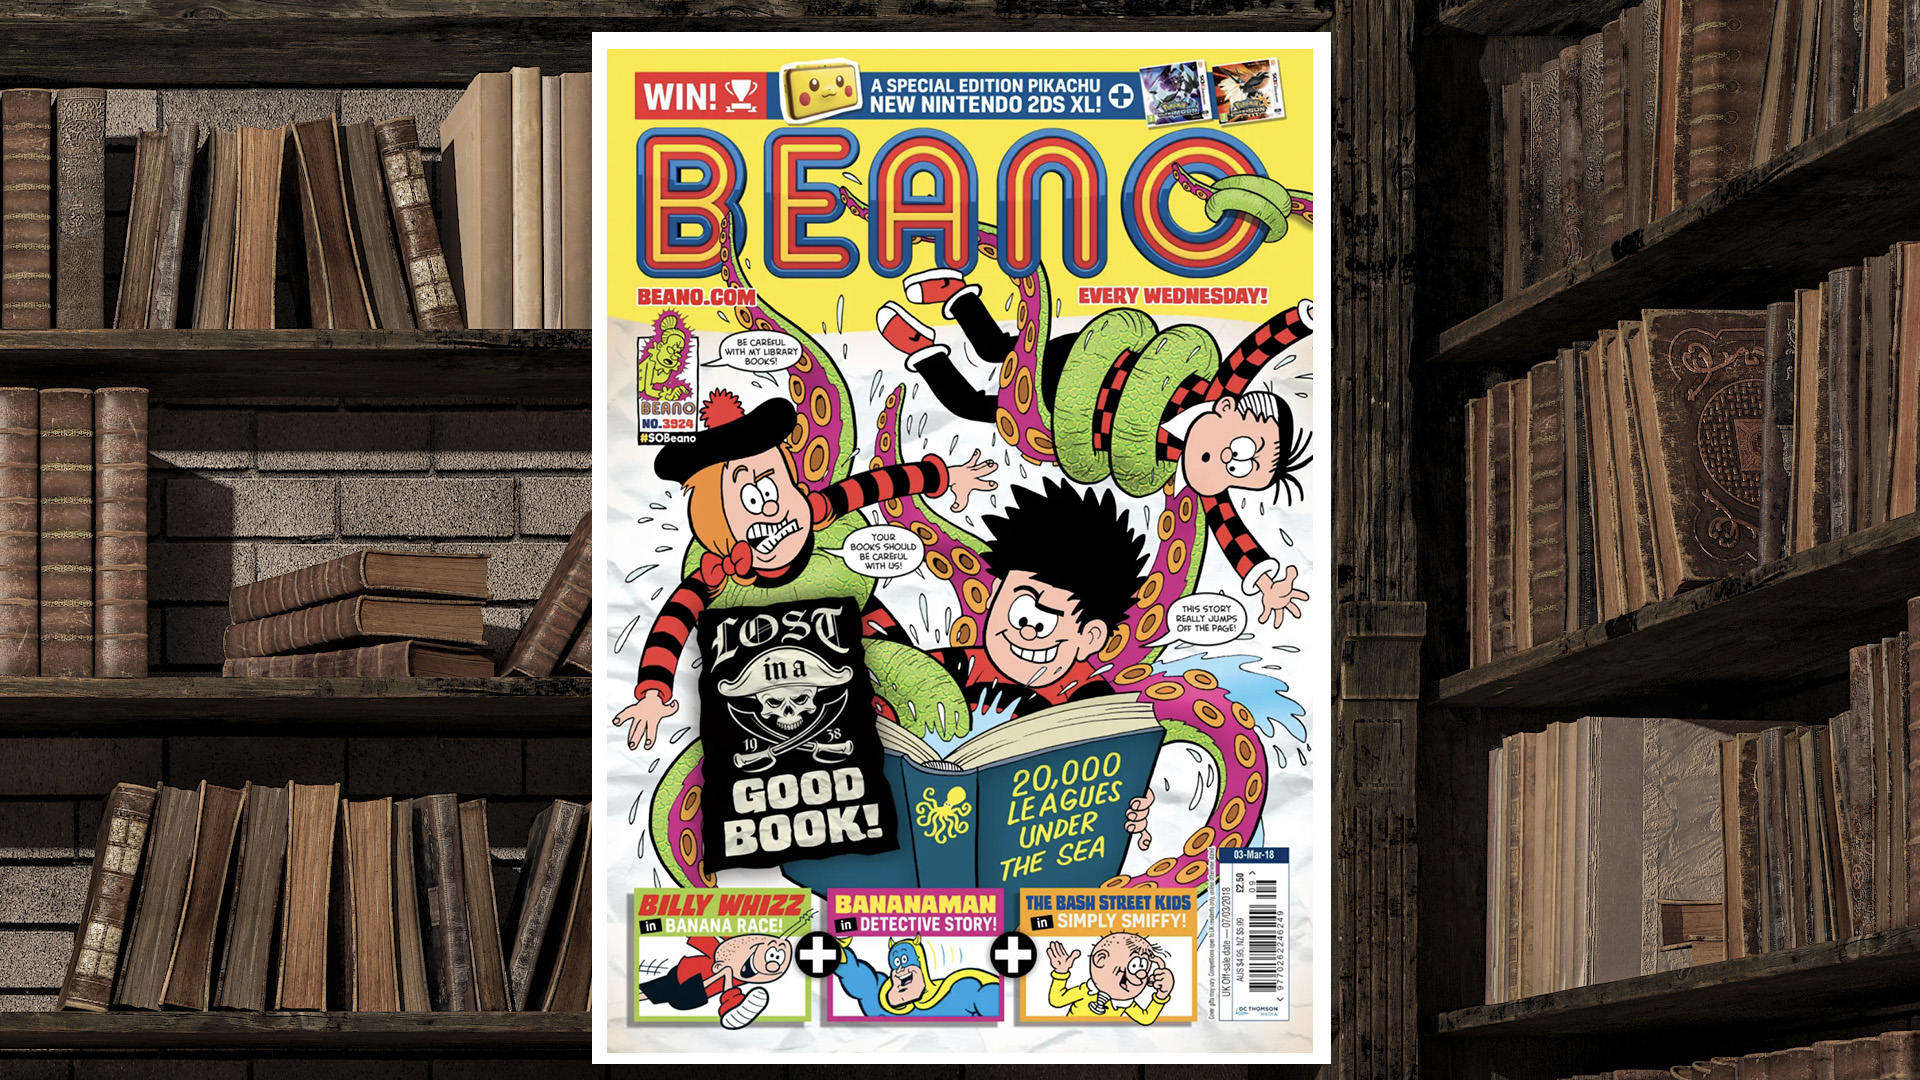 A library-themed cover of the Beano